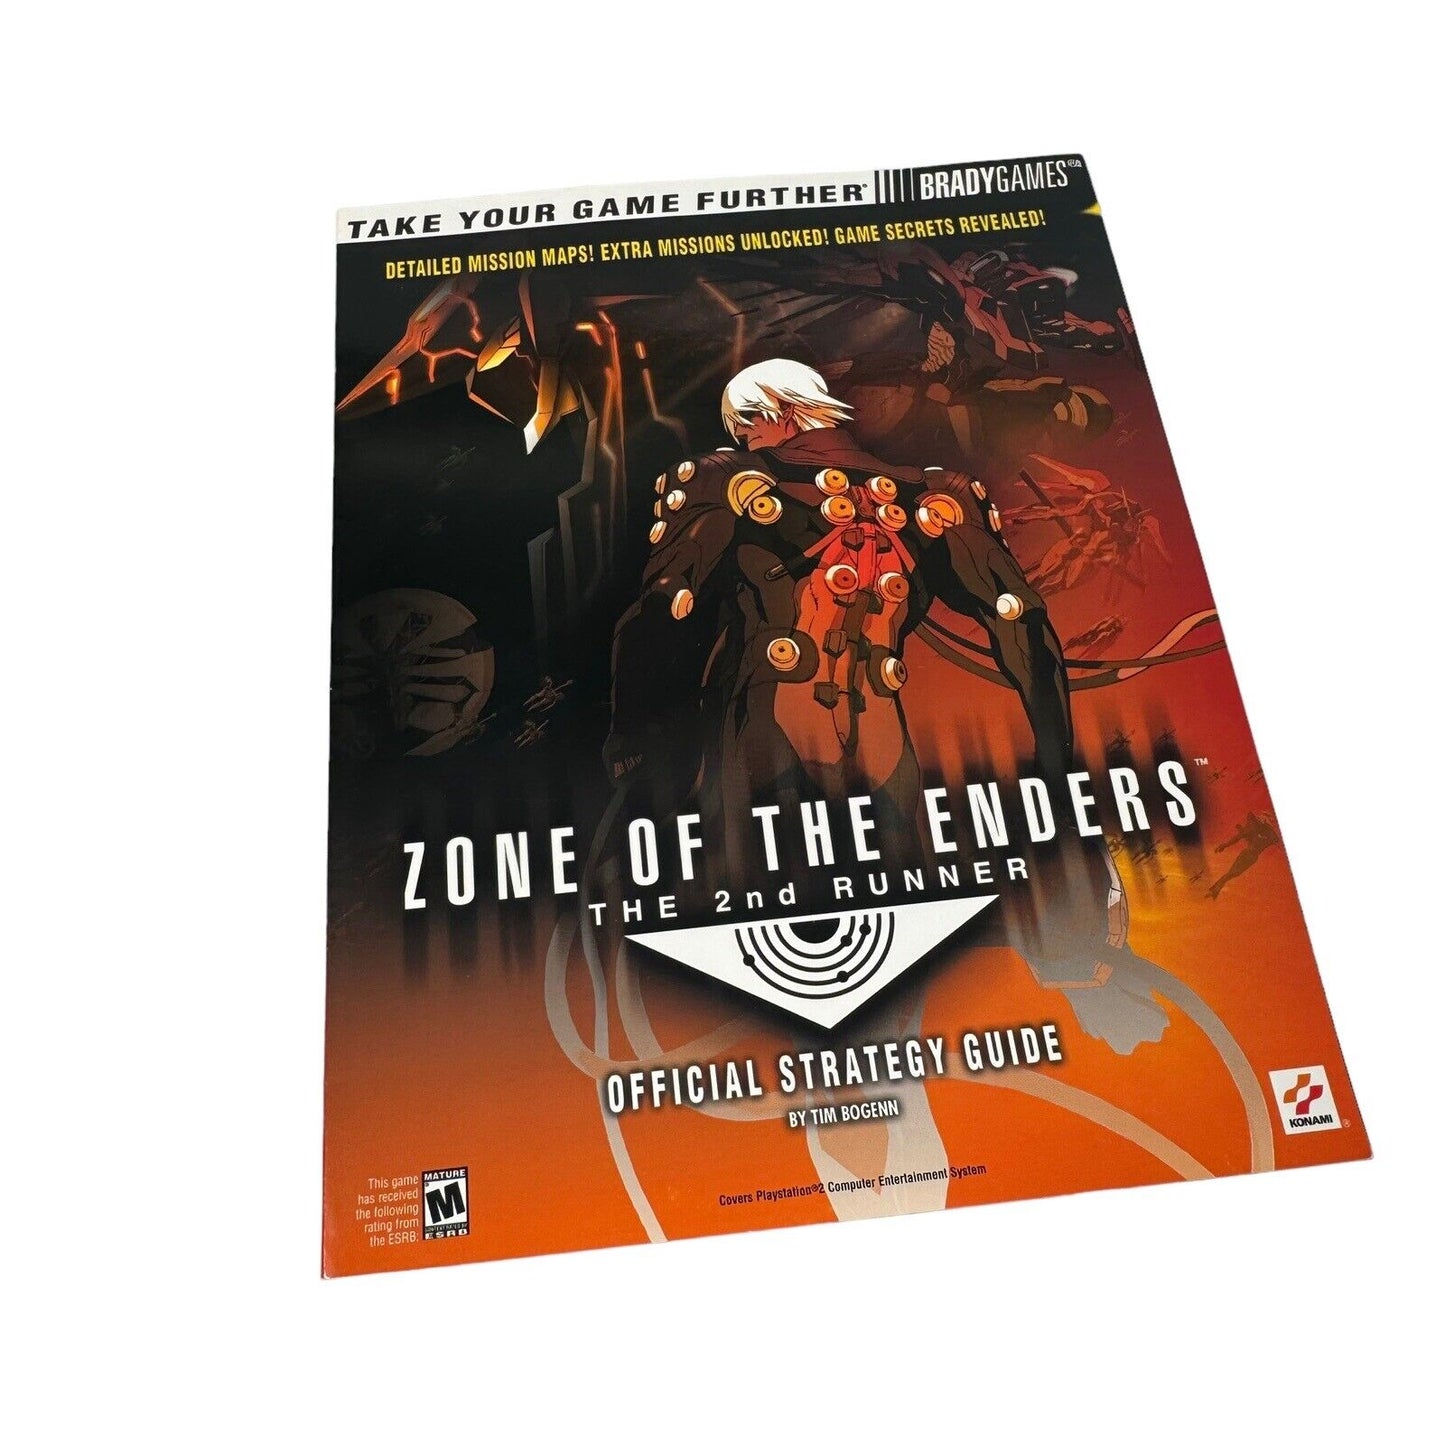 ZONE OF THE ENDERS THE 2ND RUNNER OFFICIAL STRATEGY GUIDE BRADY GAMES VTG 2003